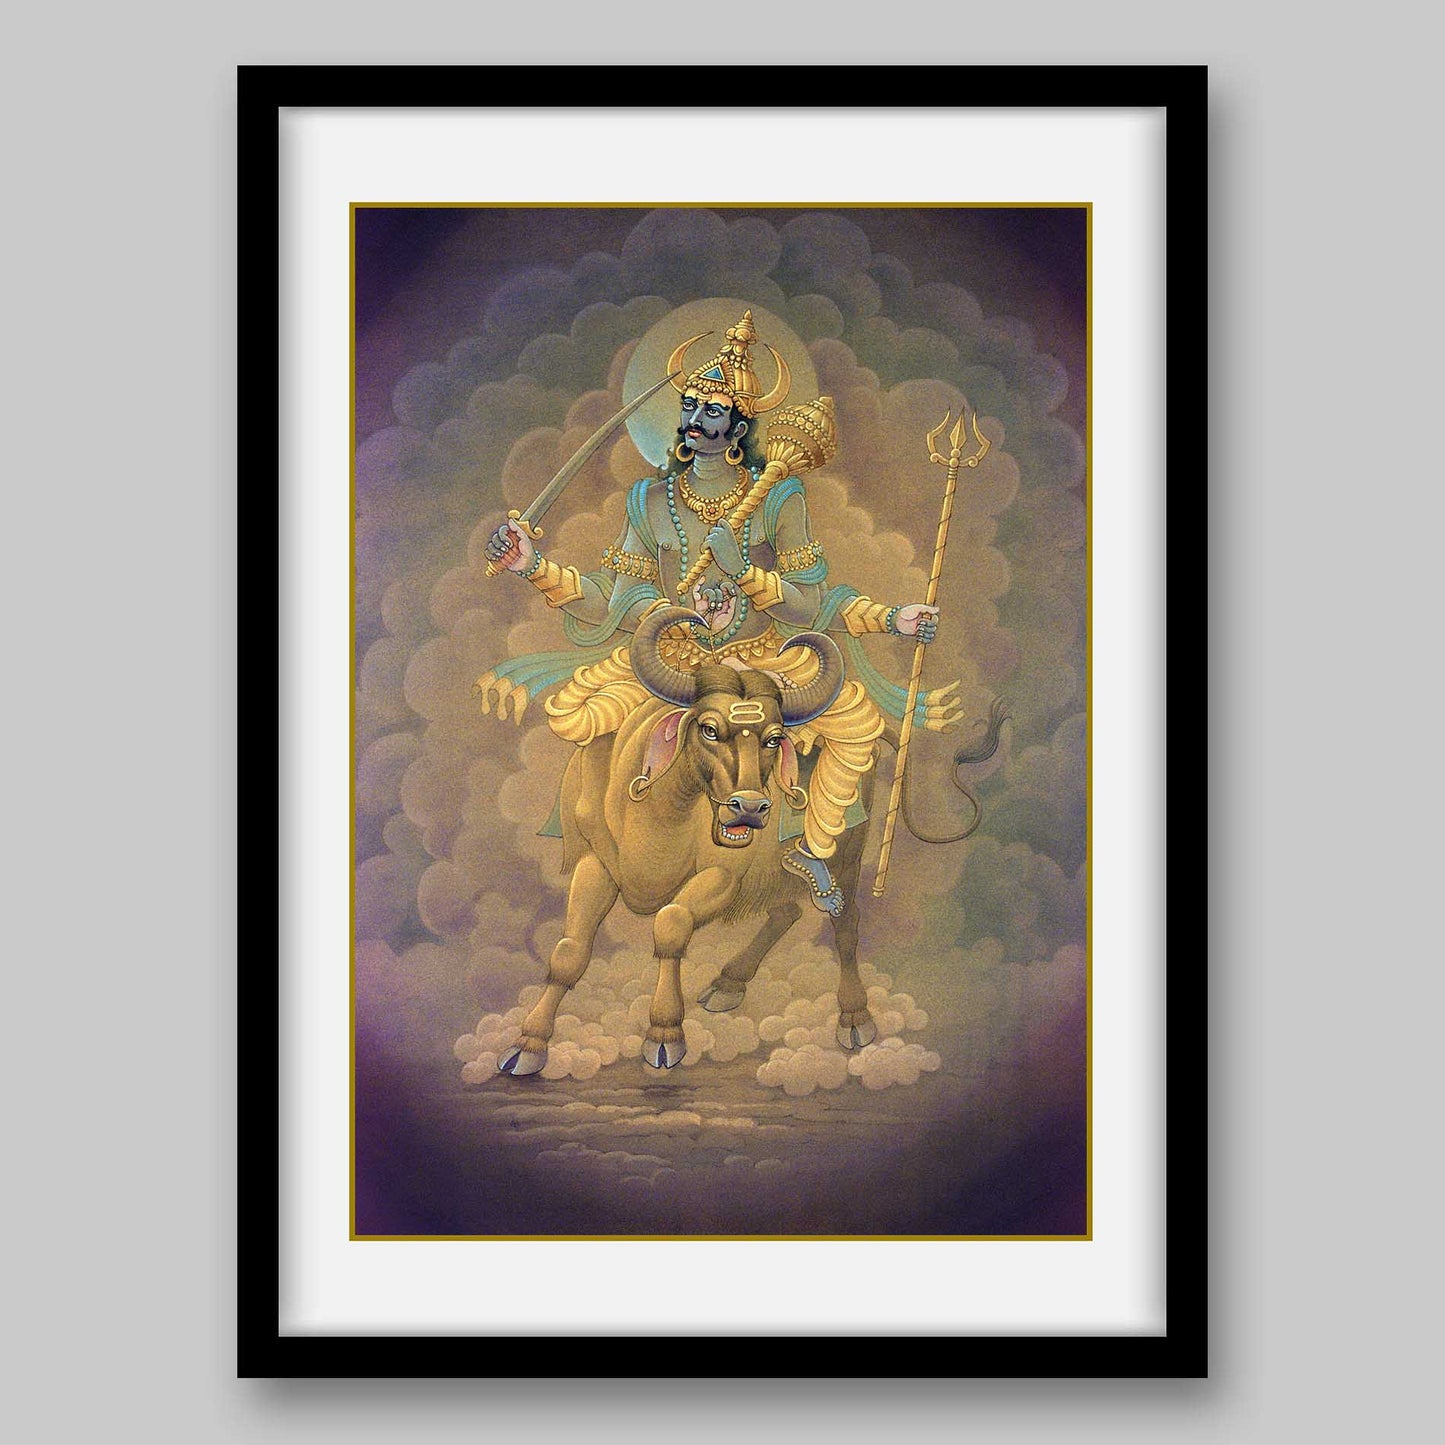 Shani - High Quality Print of Artwork by Pieter Weltevrede